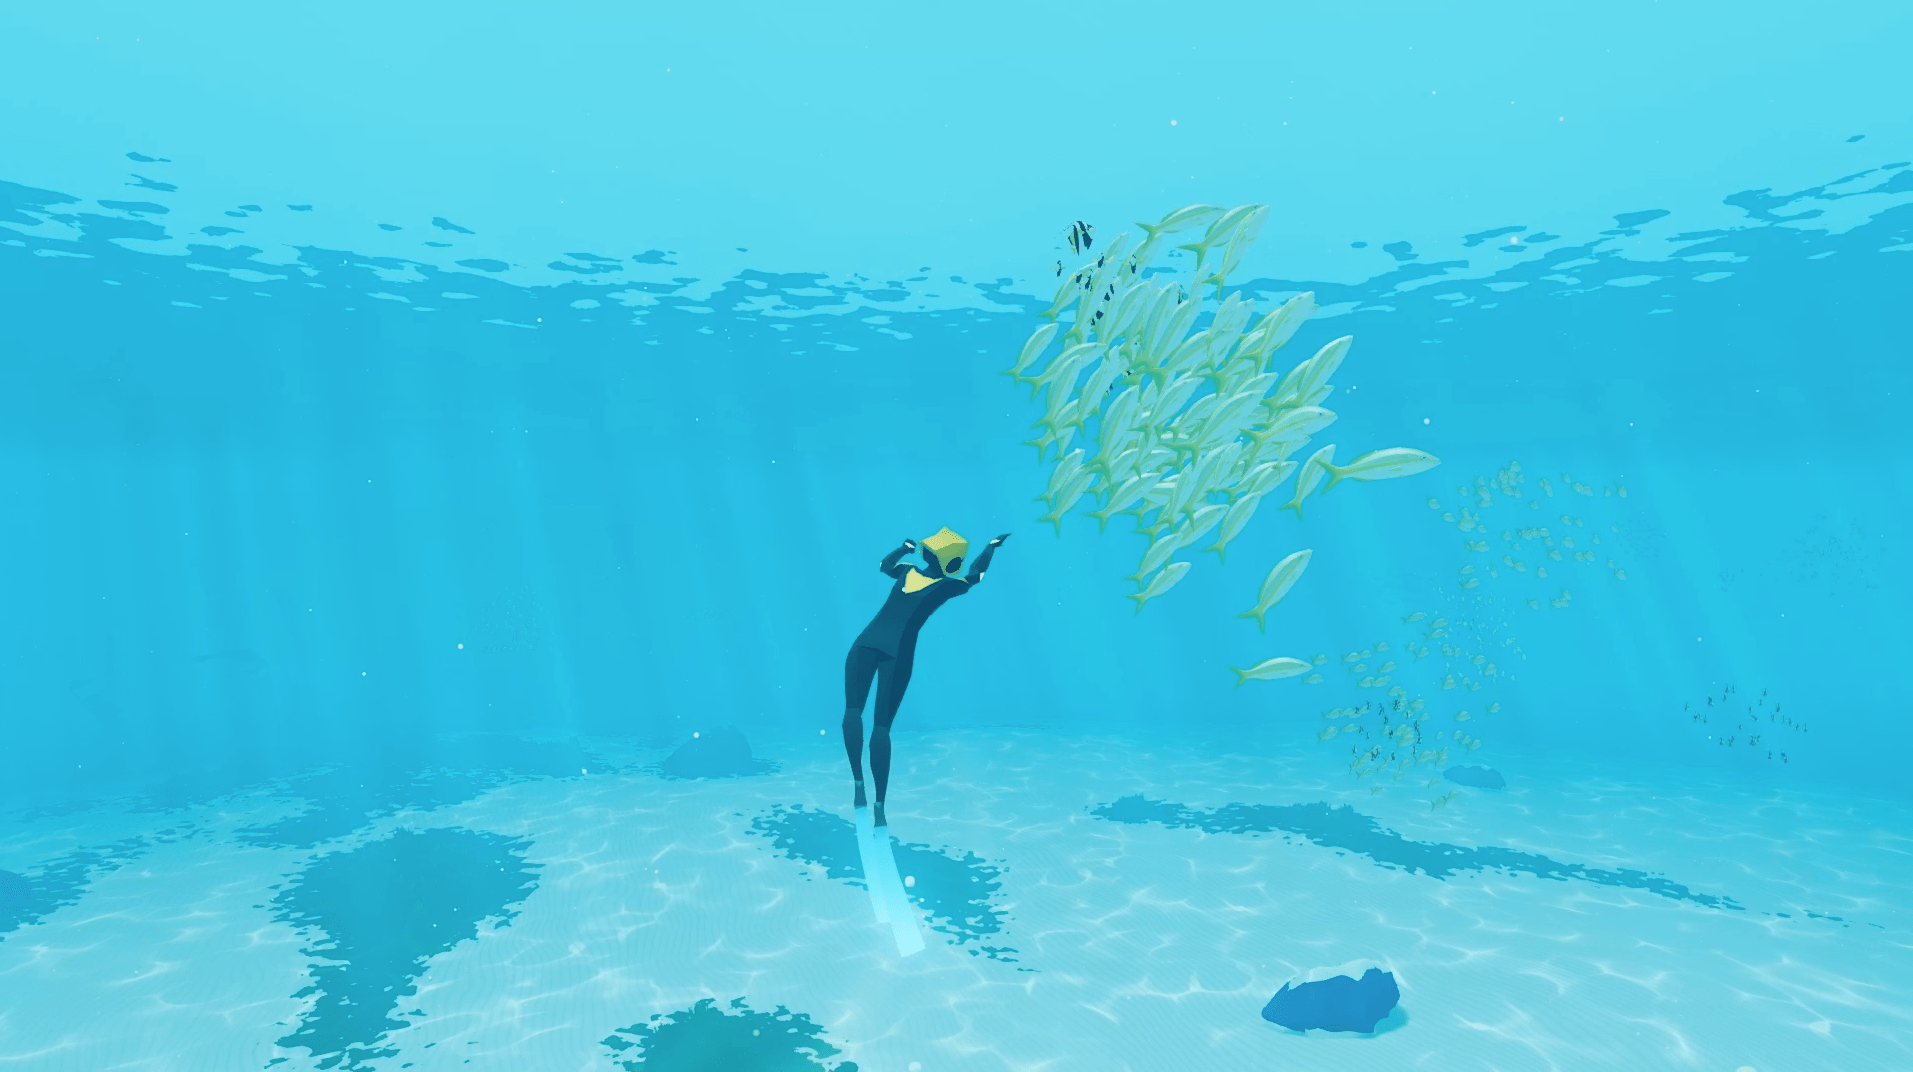 Fish and other creatures will interact with the diver.